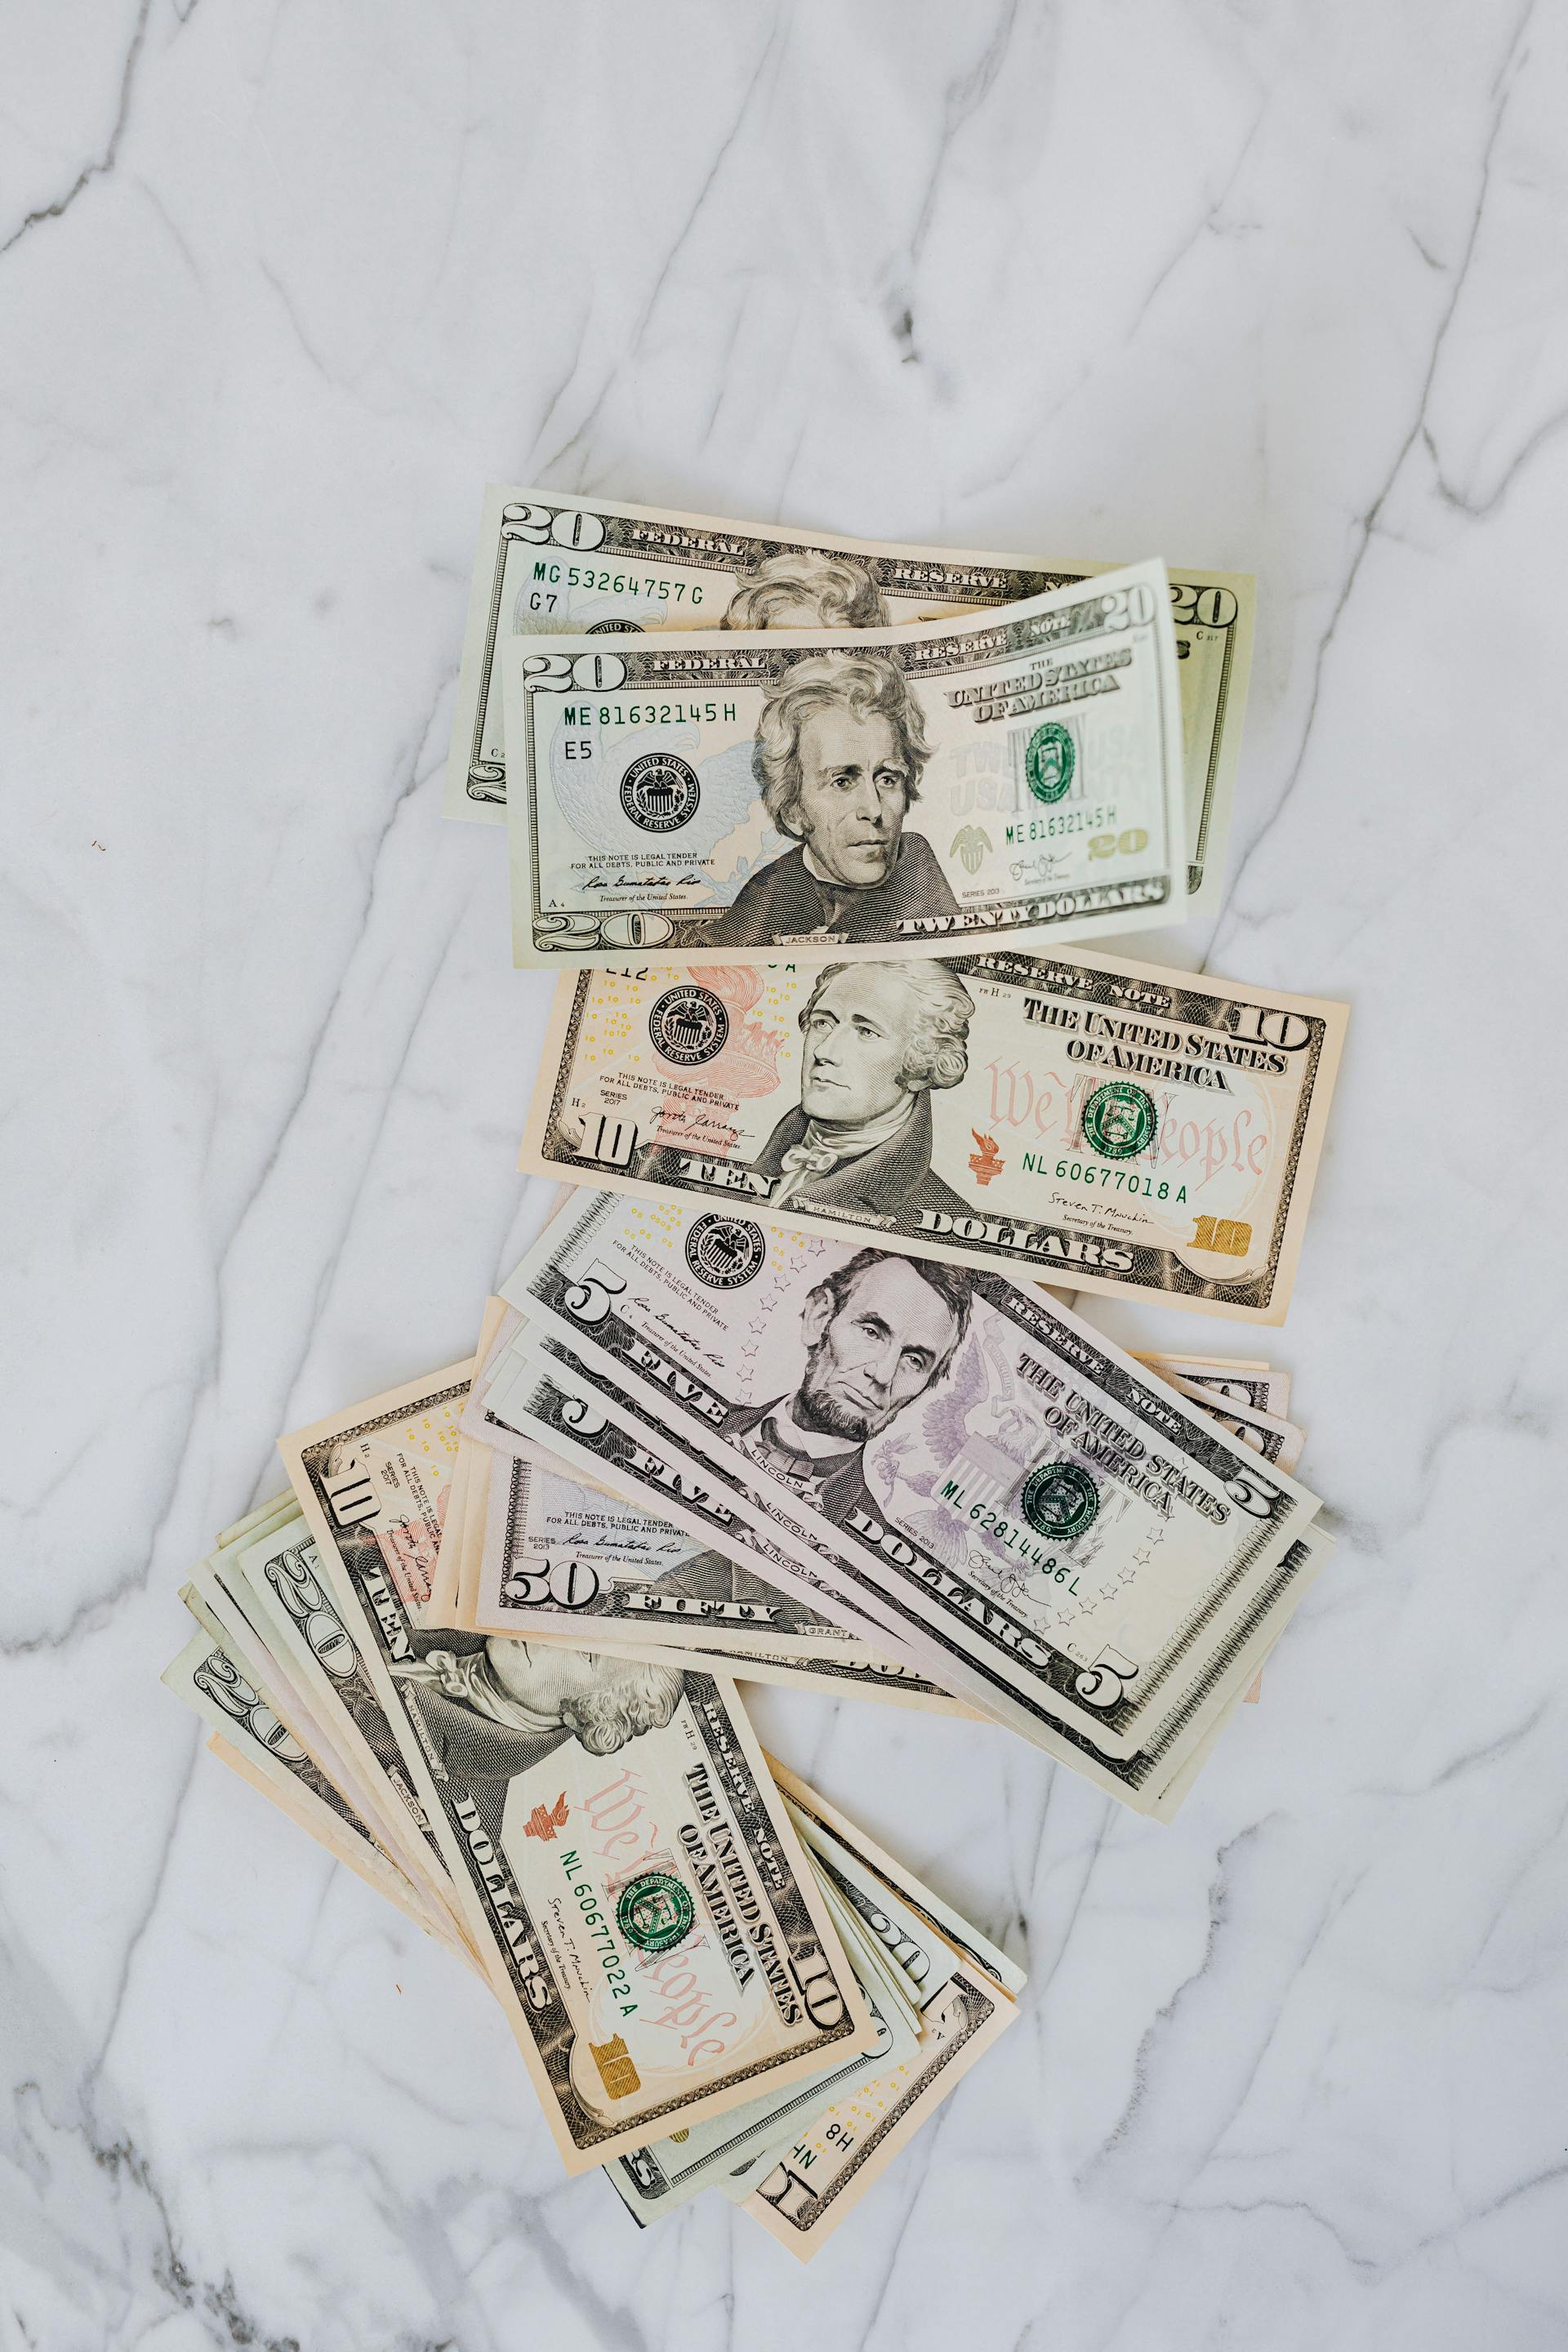 Dollar bills on a surface | Source: Pexels